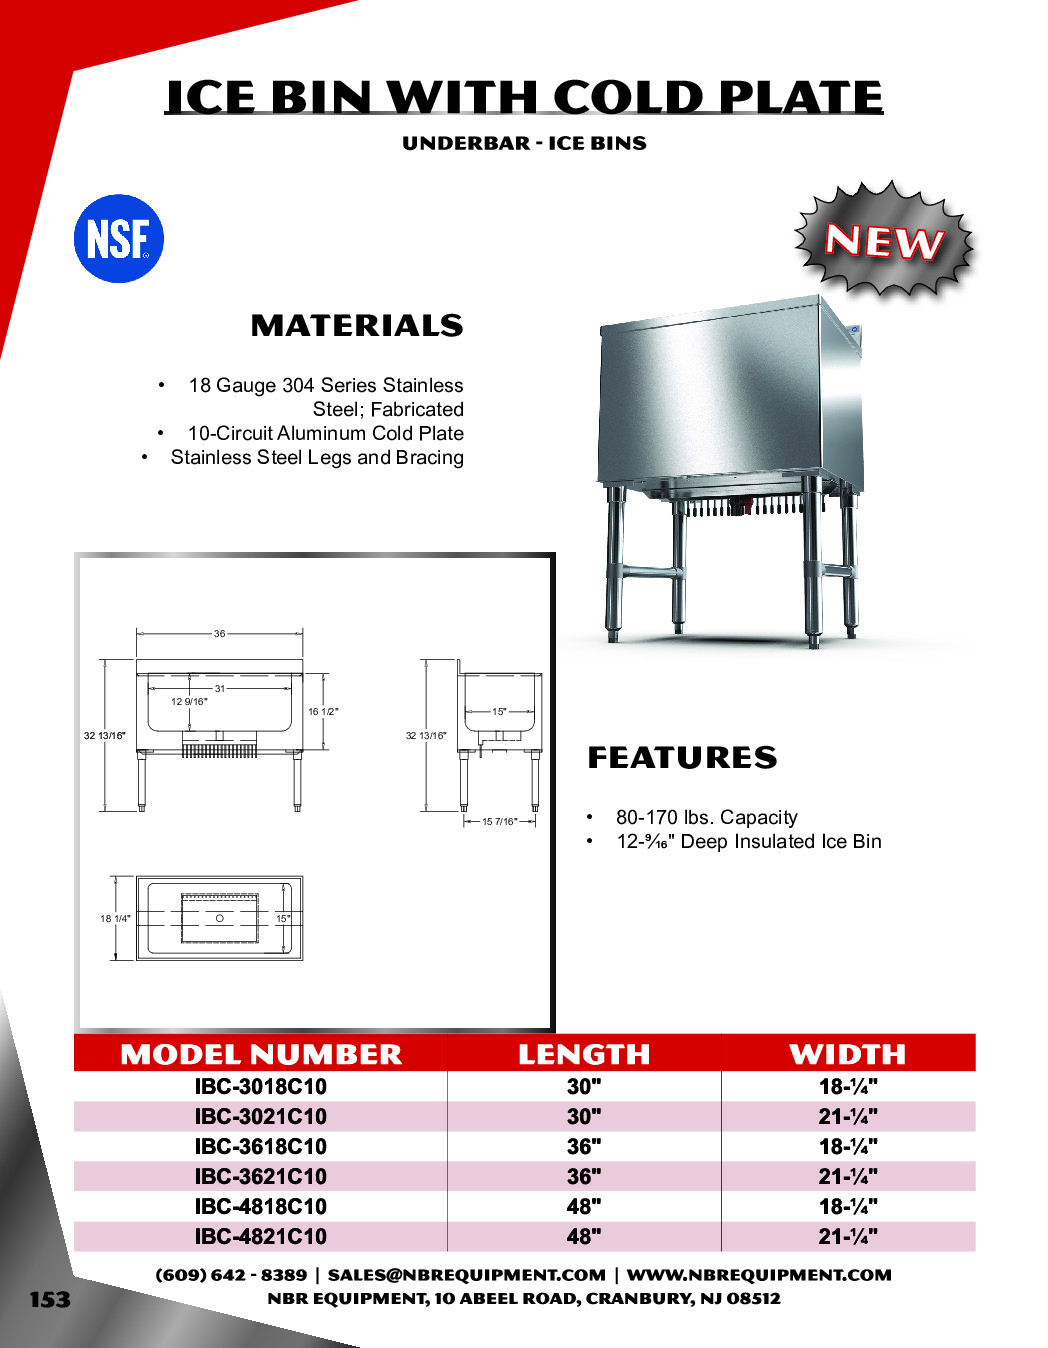 NBR Equipment IBC-3621C10 Stainless Steel Insulated Underbar Ice Bin w/ 10 Circuit Cold Plate